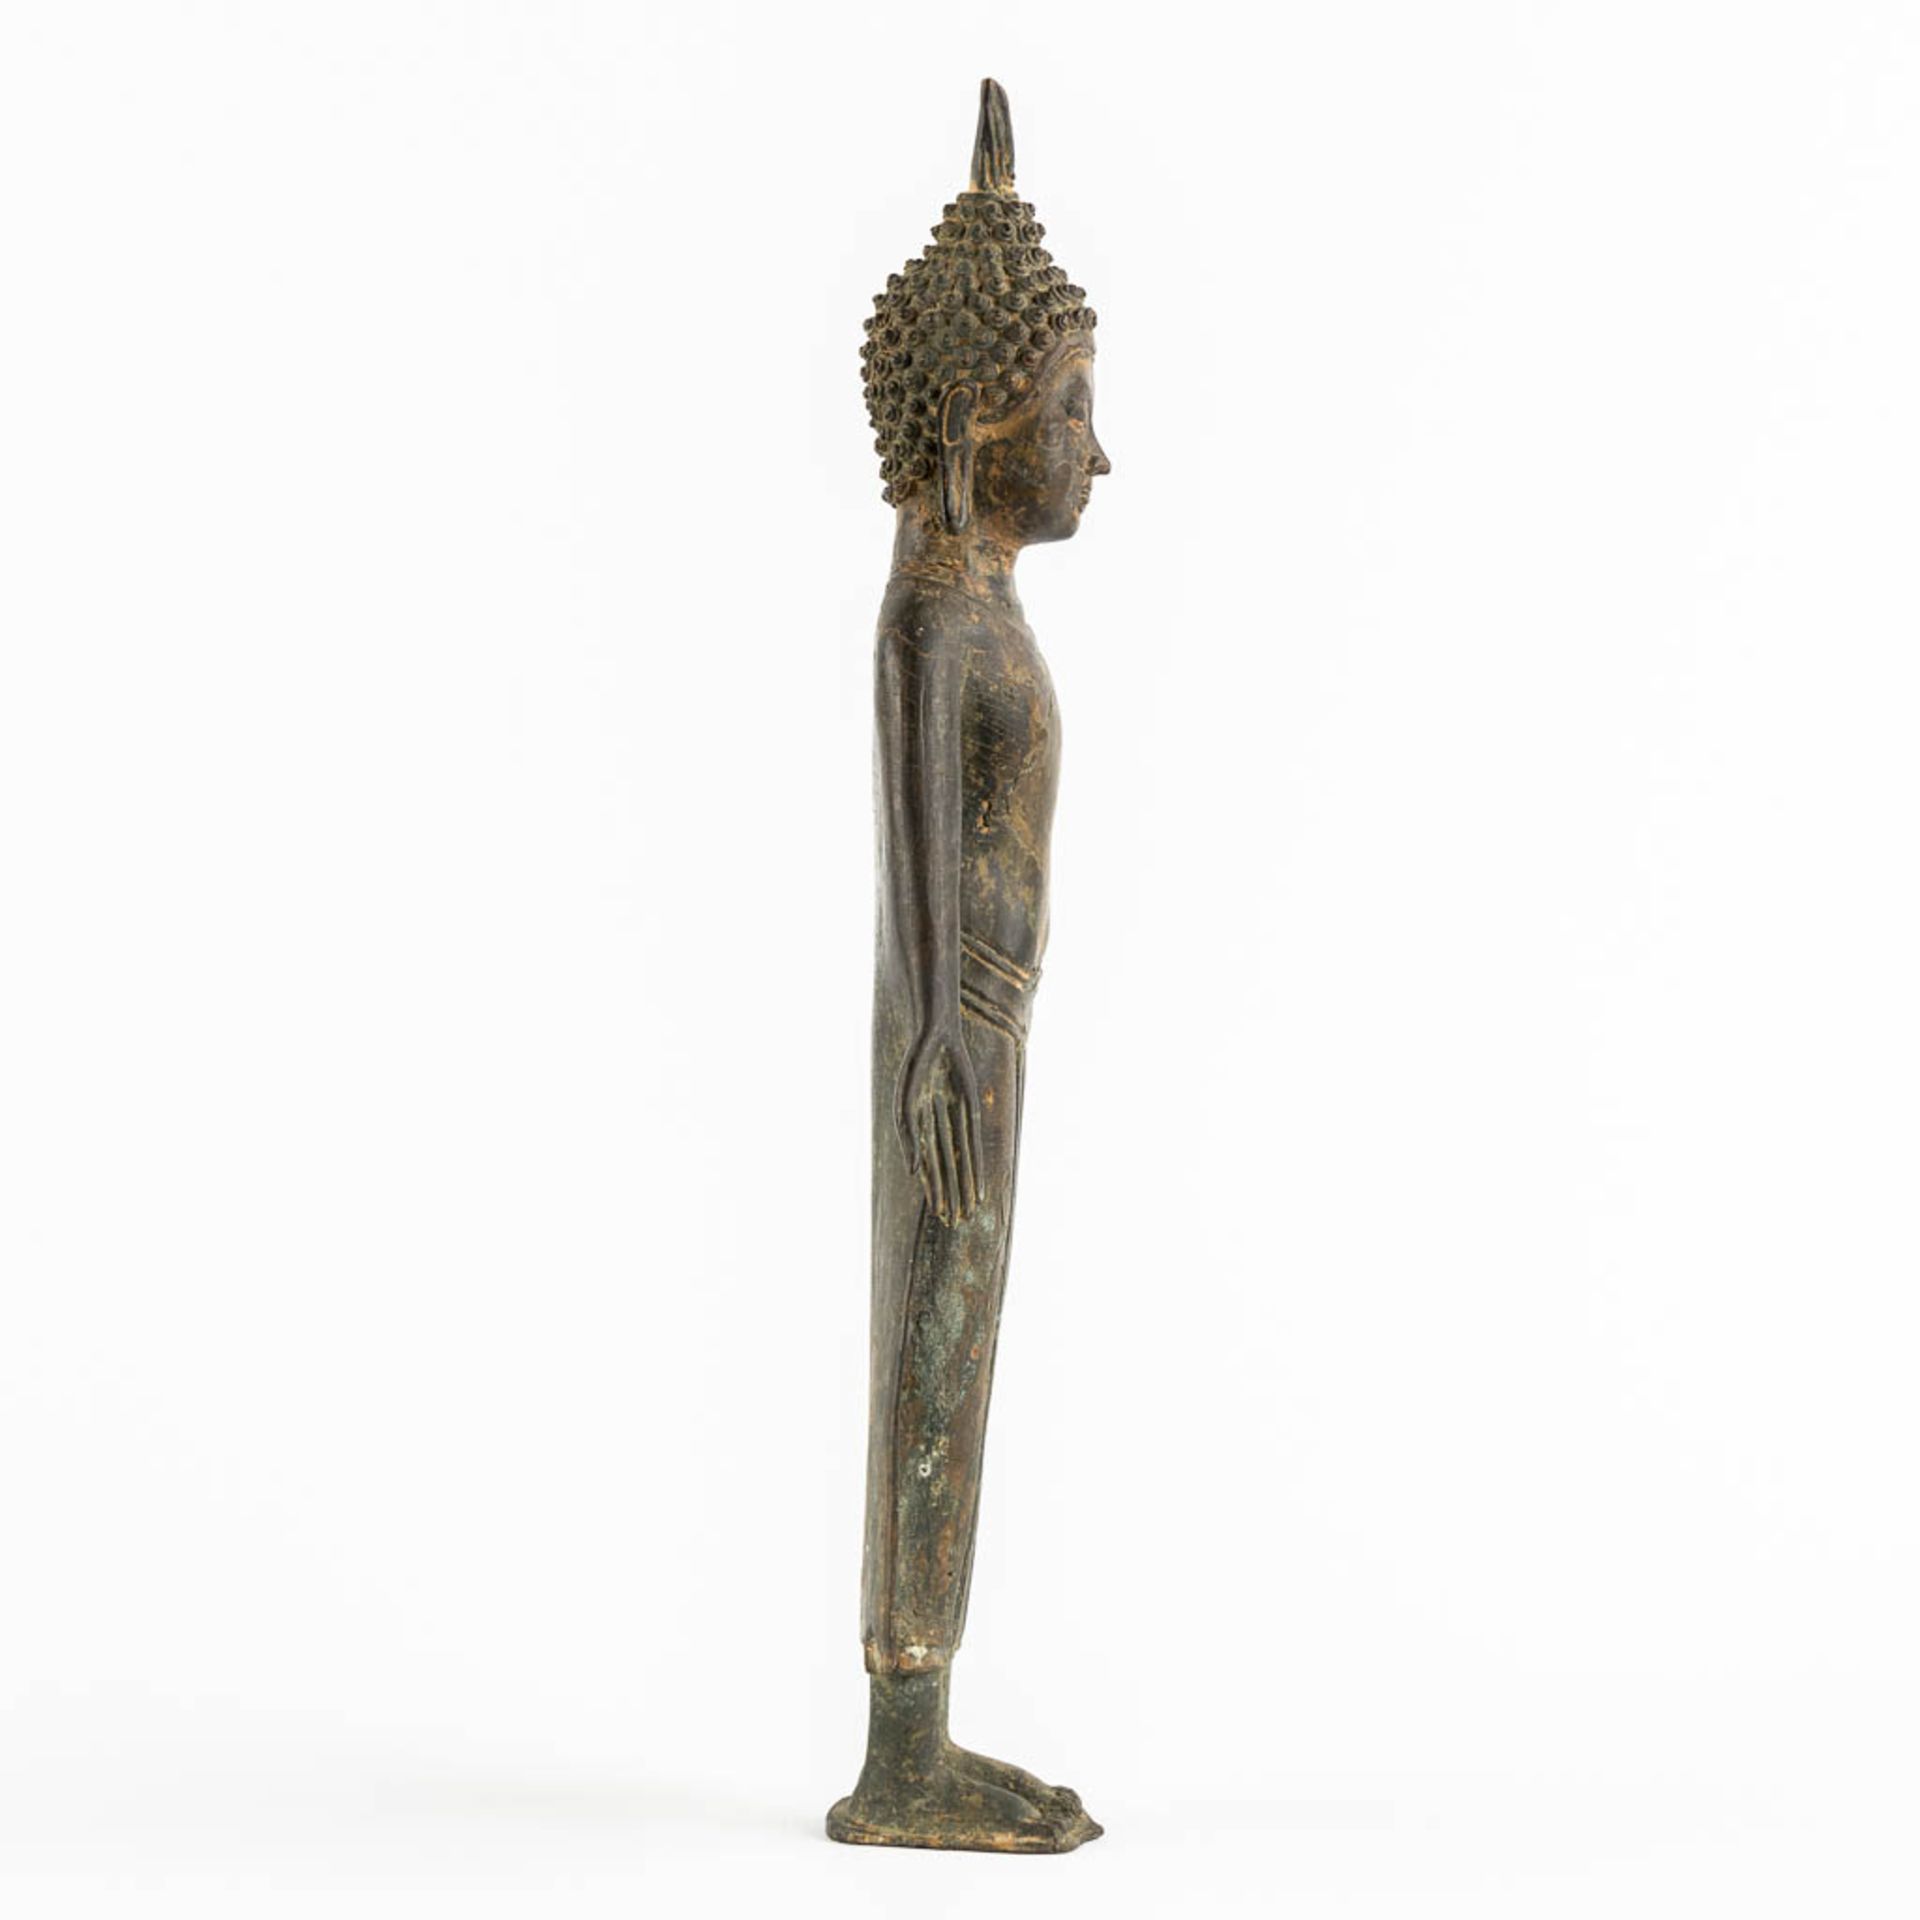 A Thai figurine of a standing Buddha, Patinated bronze. (W:16 x H:44 cm) - Image 4 of 10